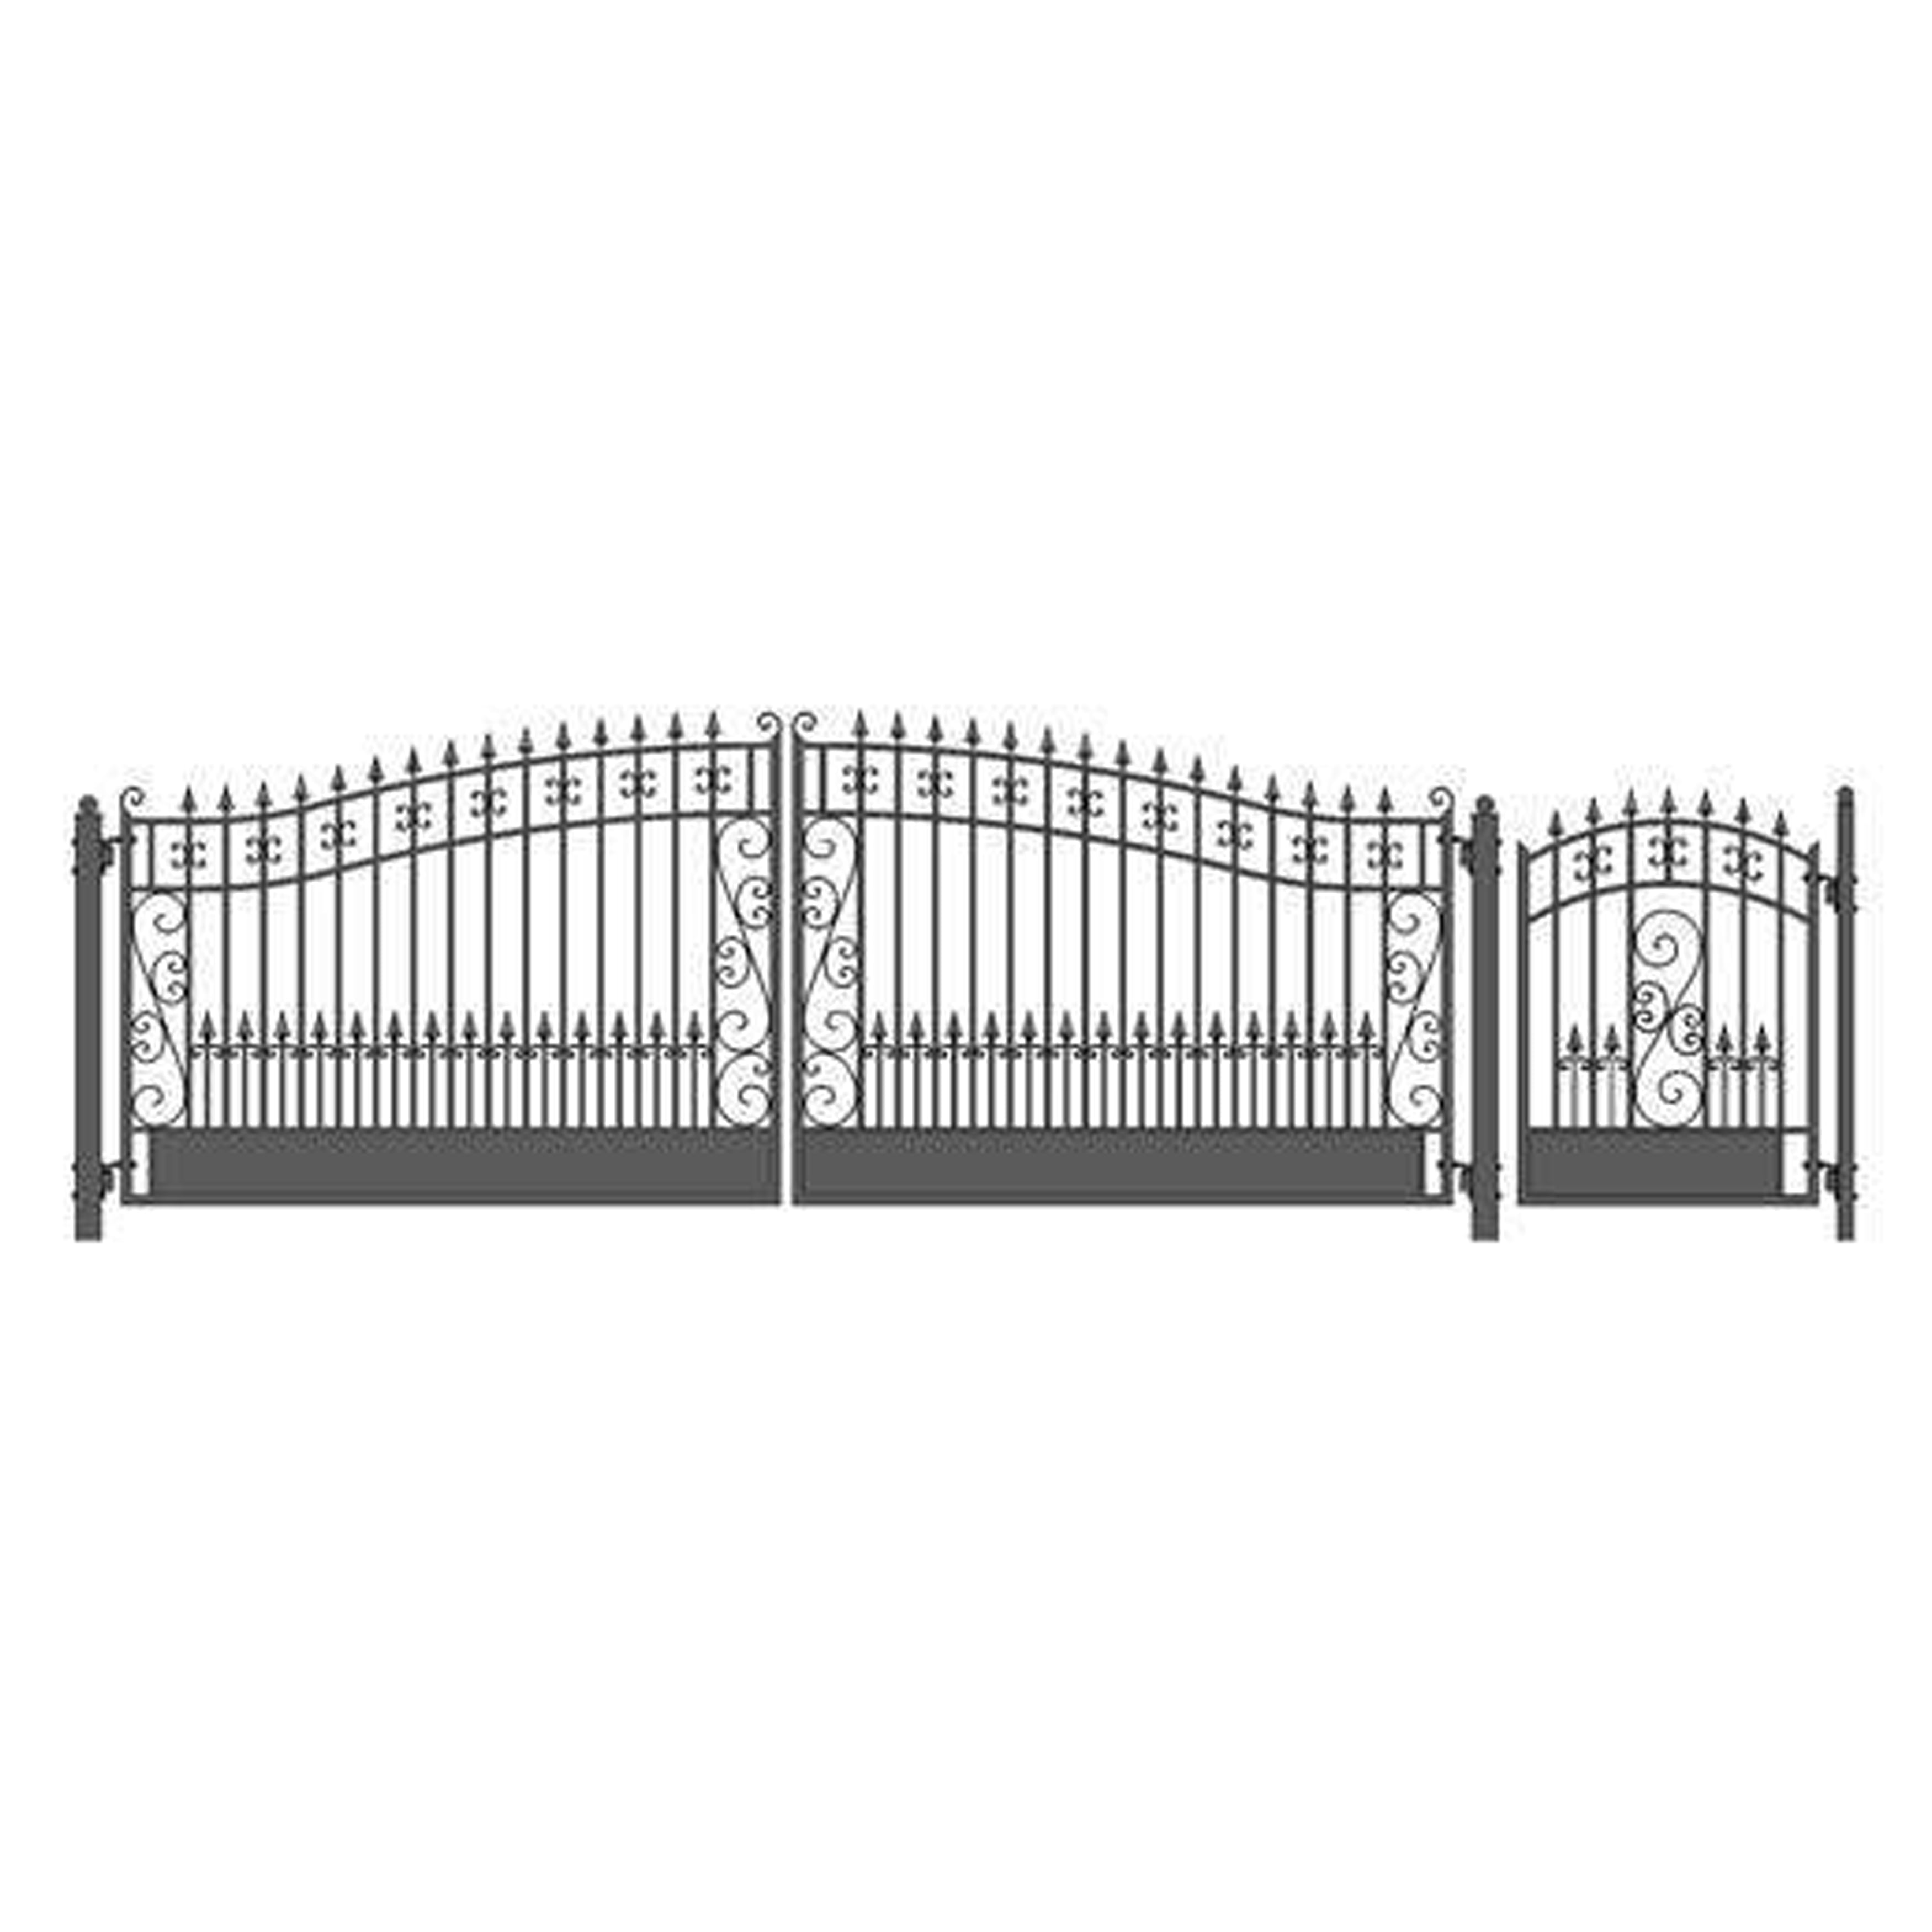 Set18x4vend-unb 18 & 4 Ft. Venice Style Steel Swing Dual Driveway With Pedestrian Gate